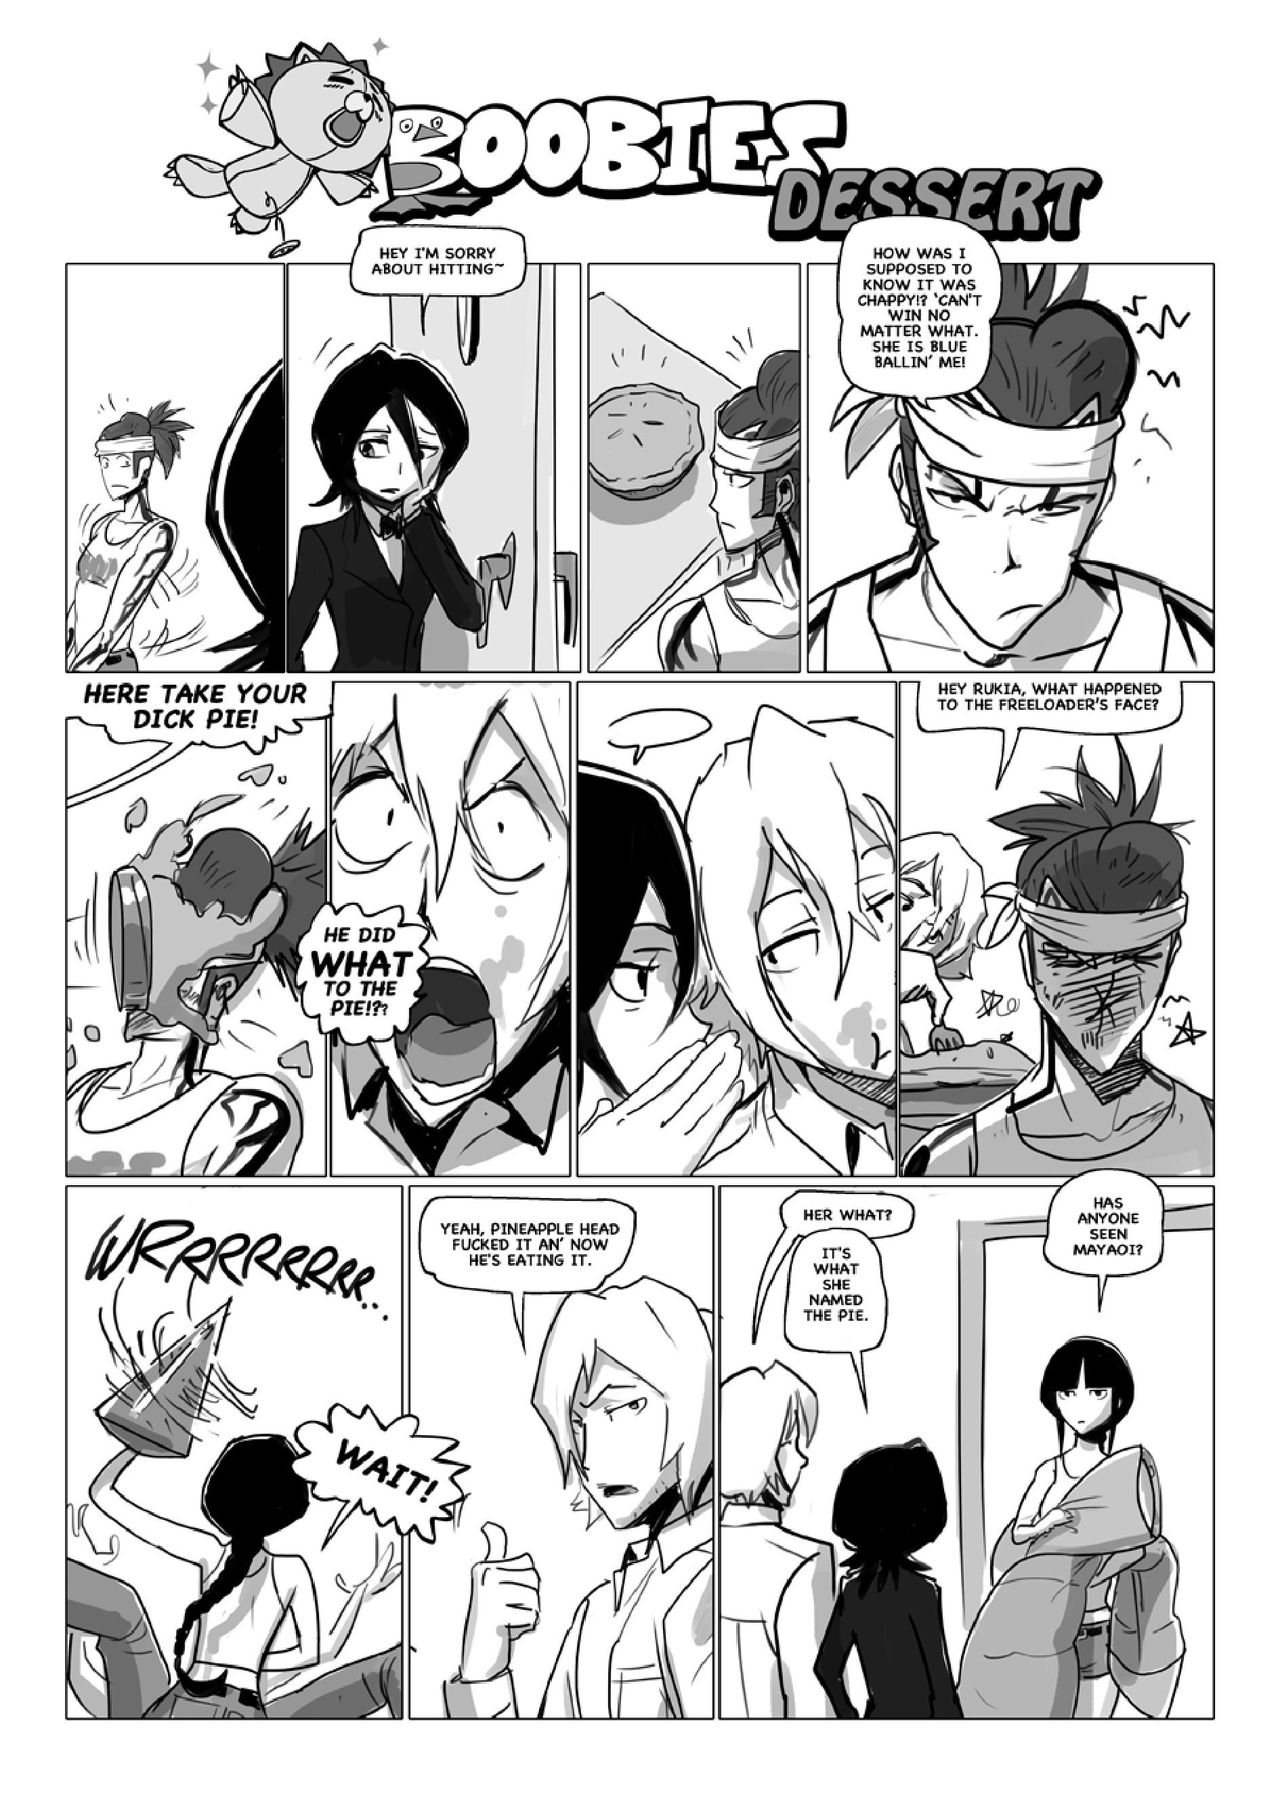 [Gairon] Happy to Serve You - Chapter 9 (Bleach) 29